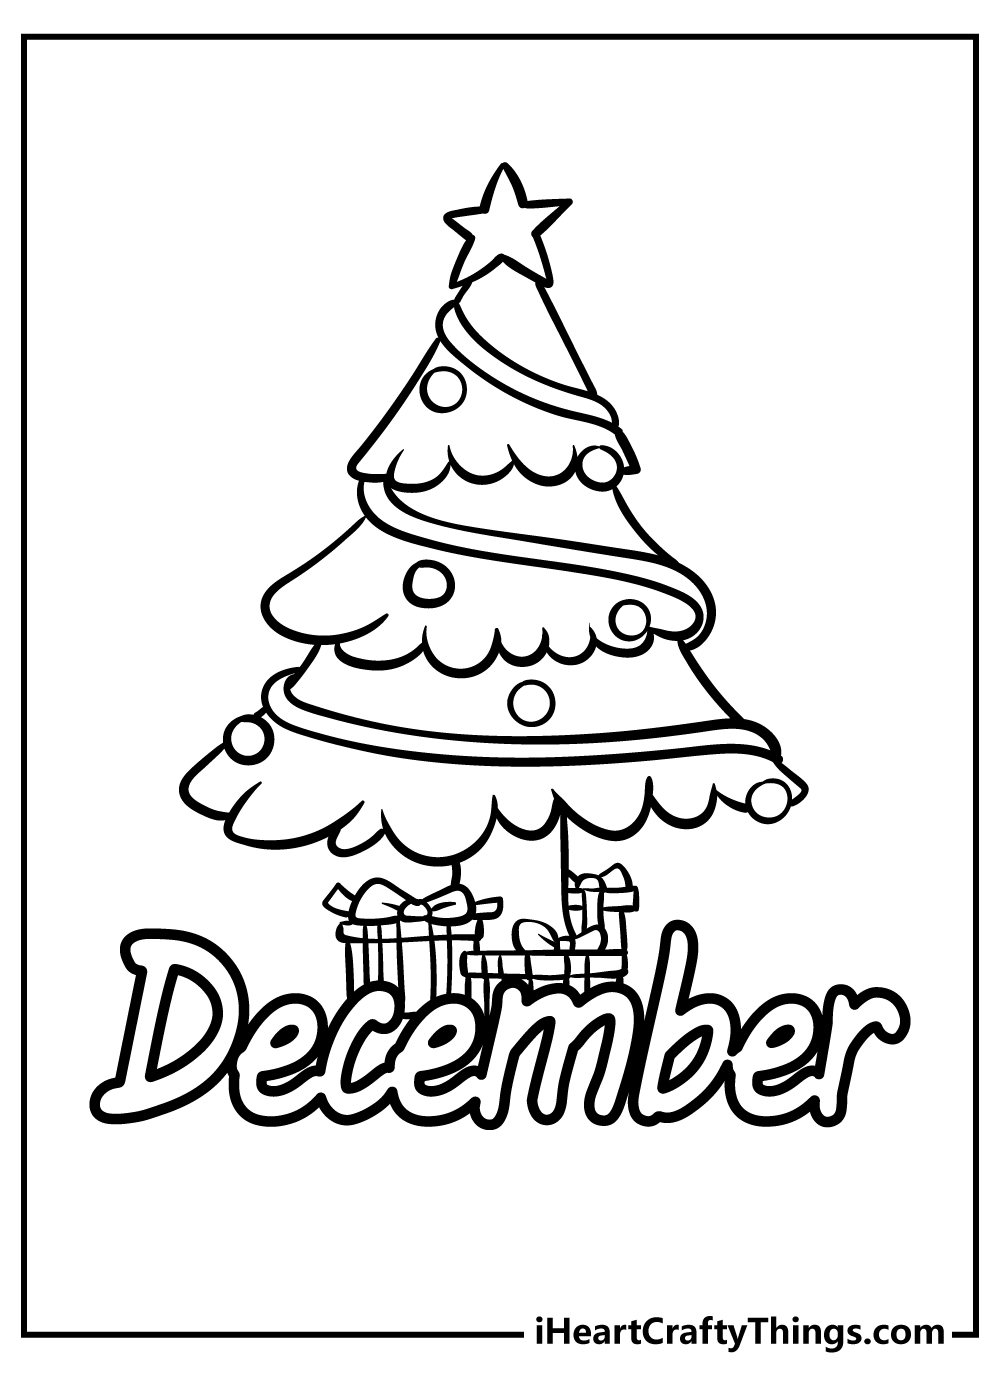 December Coloring Pages for adults free printable